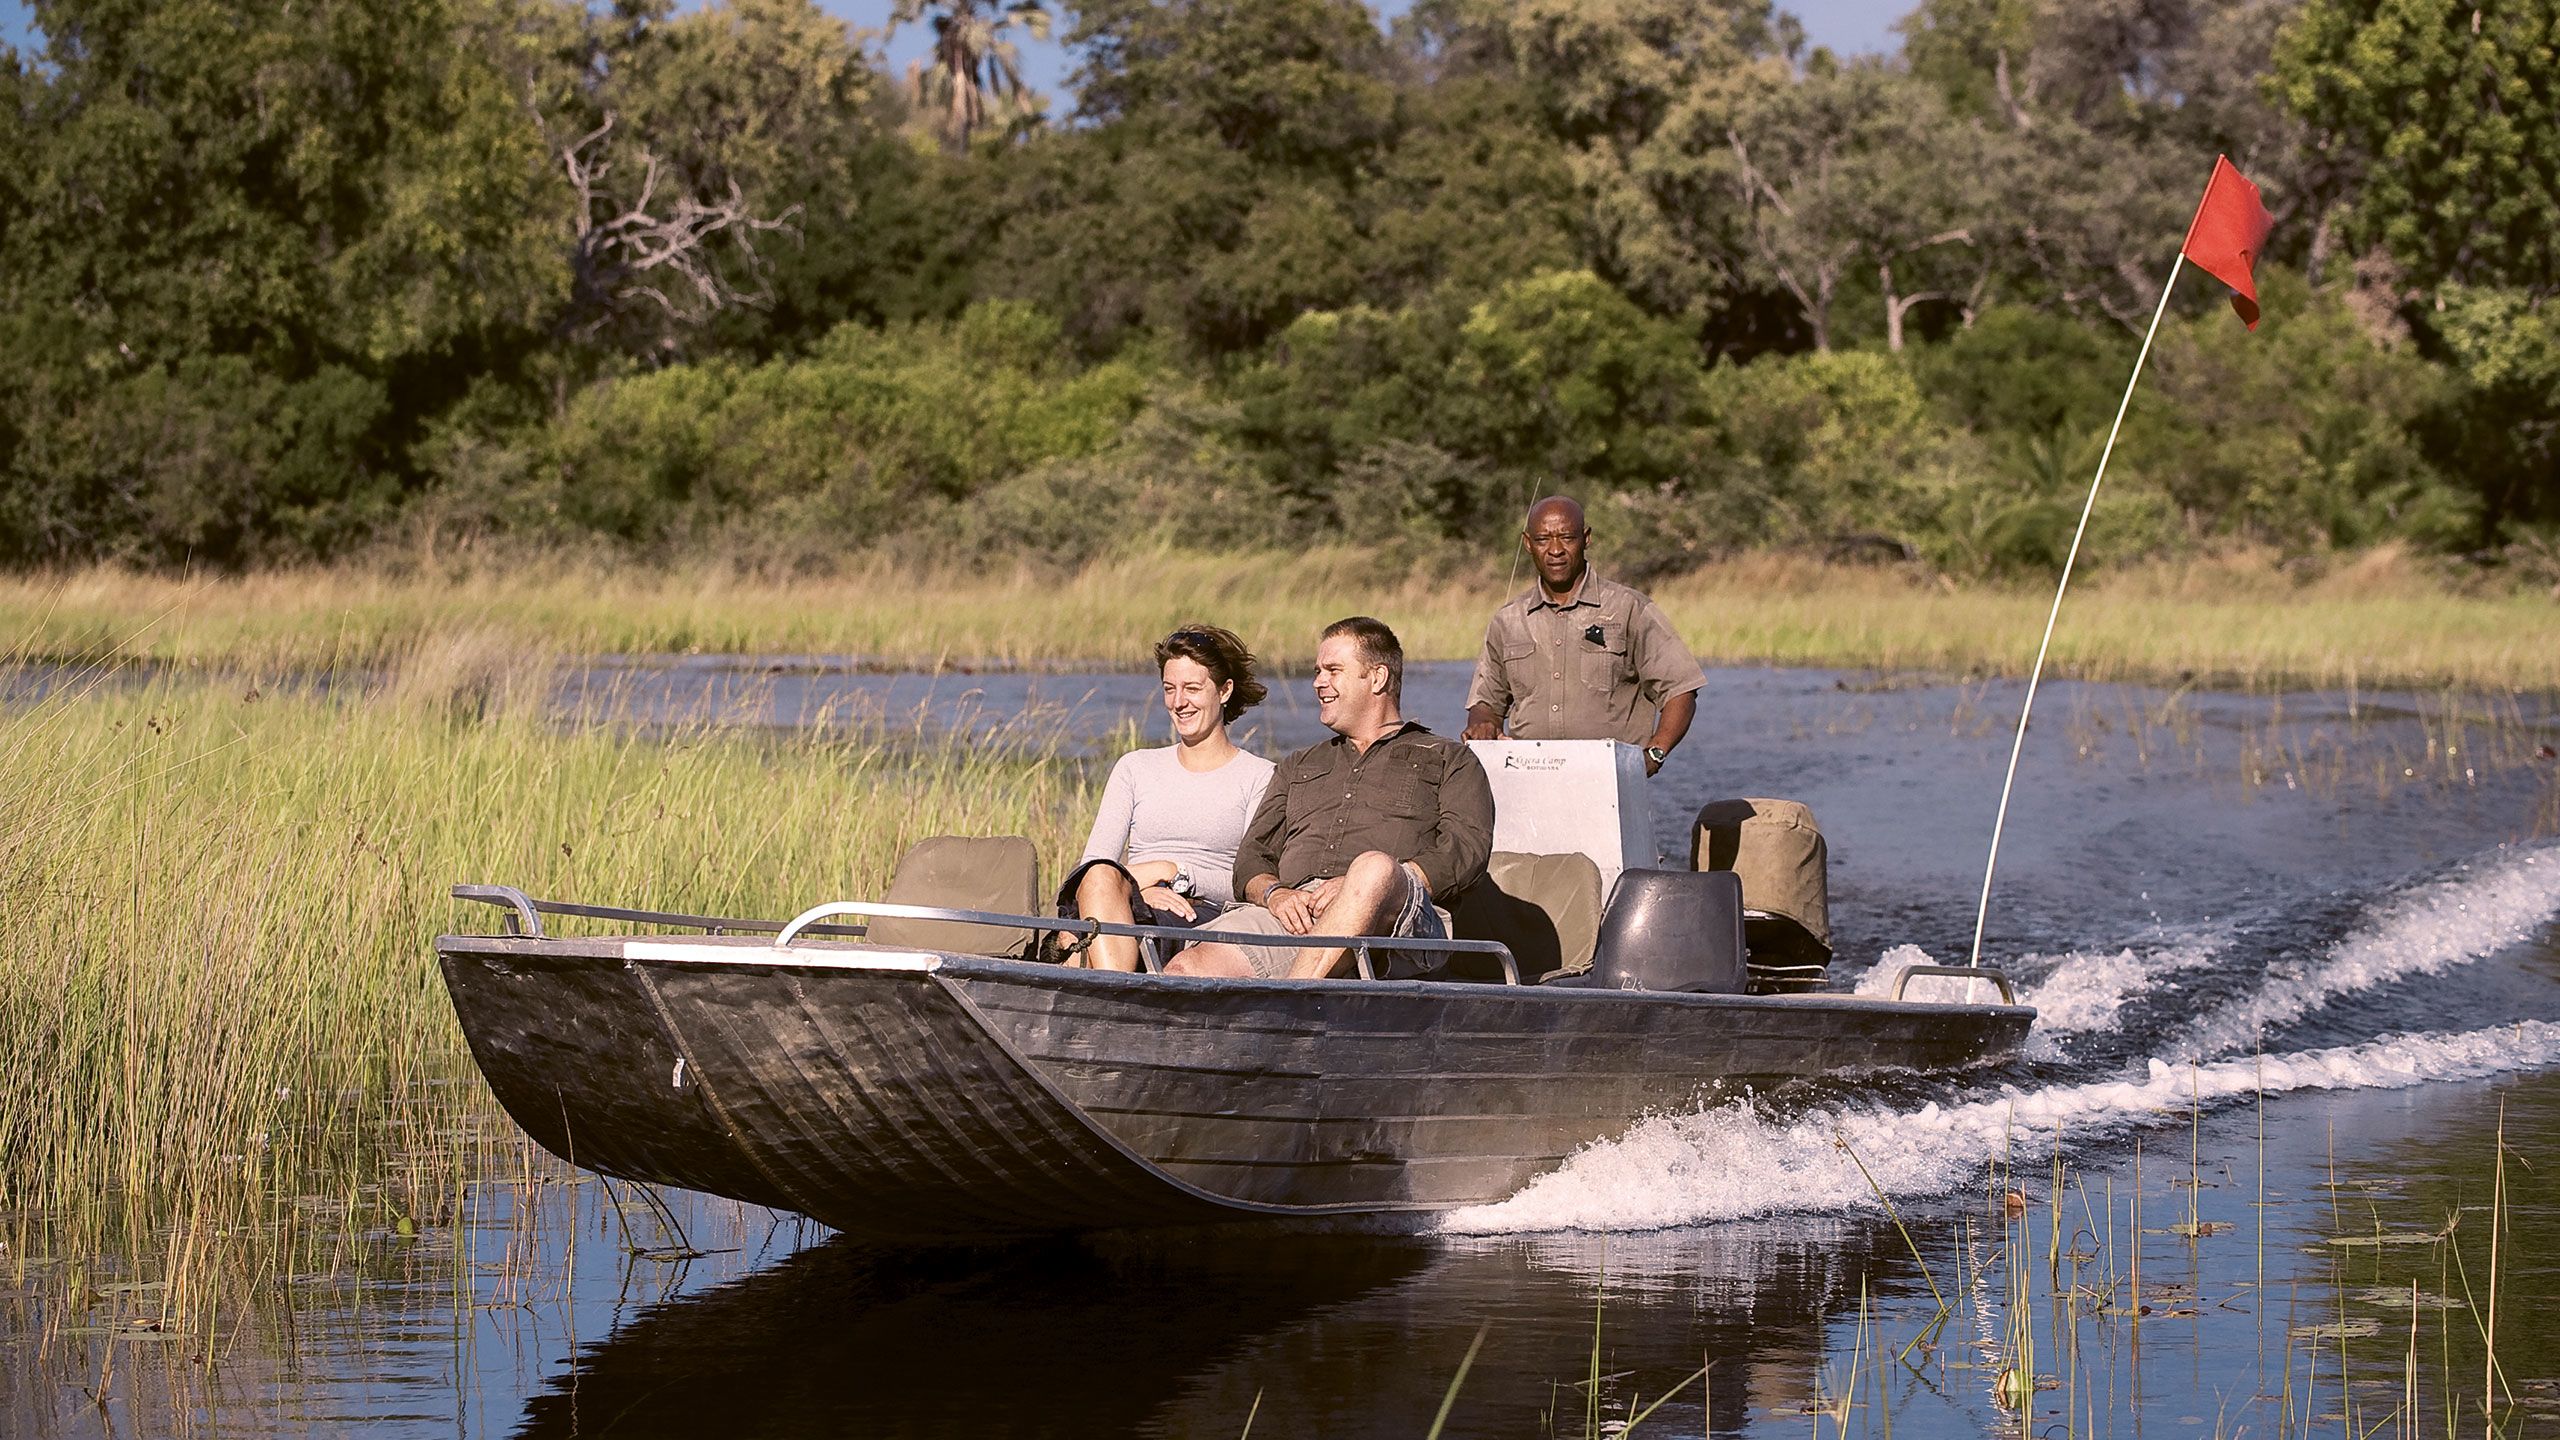 A boat ride in the Okavango Delta. The days of game-drive-only safaris are long gone. People want to avoid the crowds and go places others haven’t gone before, and they want to explore these places in new ways, with wildlife just a few feet away. Photo courtesy of Wilderness Safaris/Dana Allen